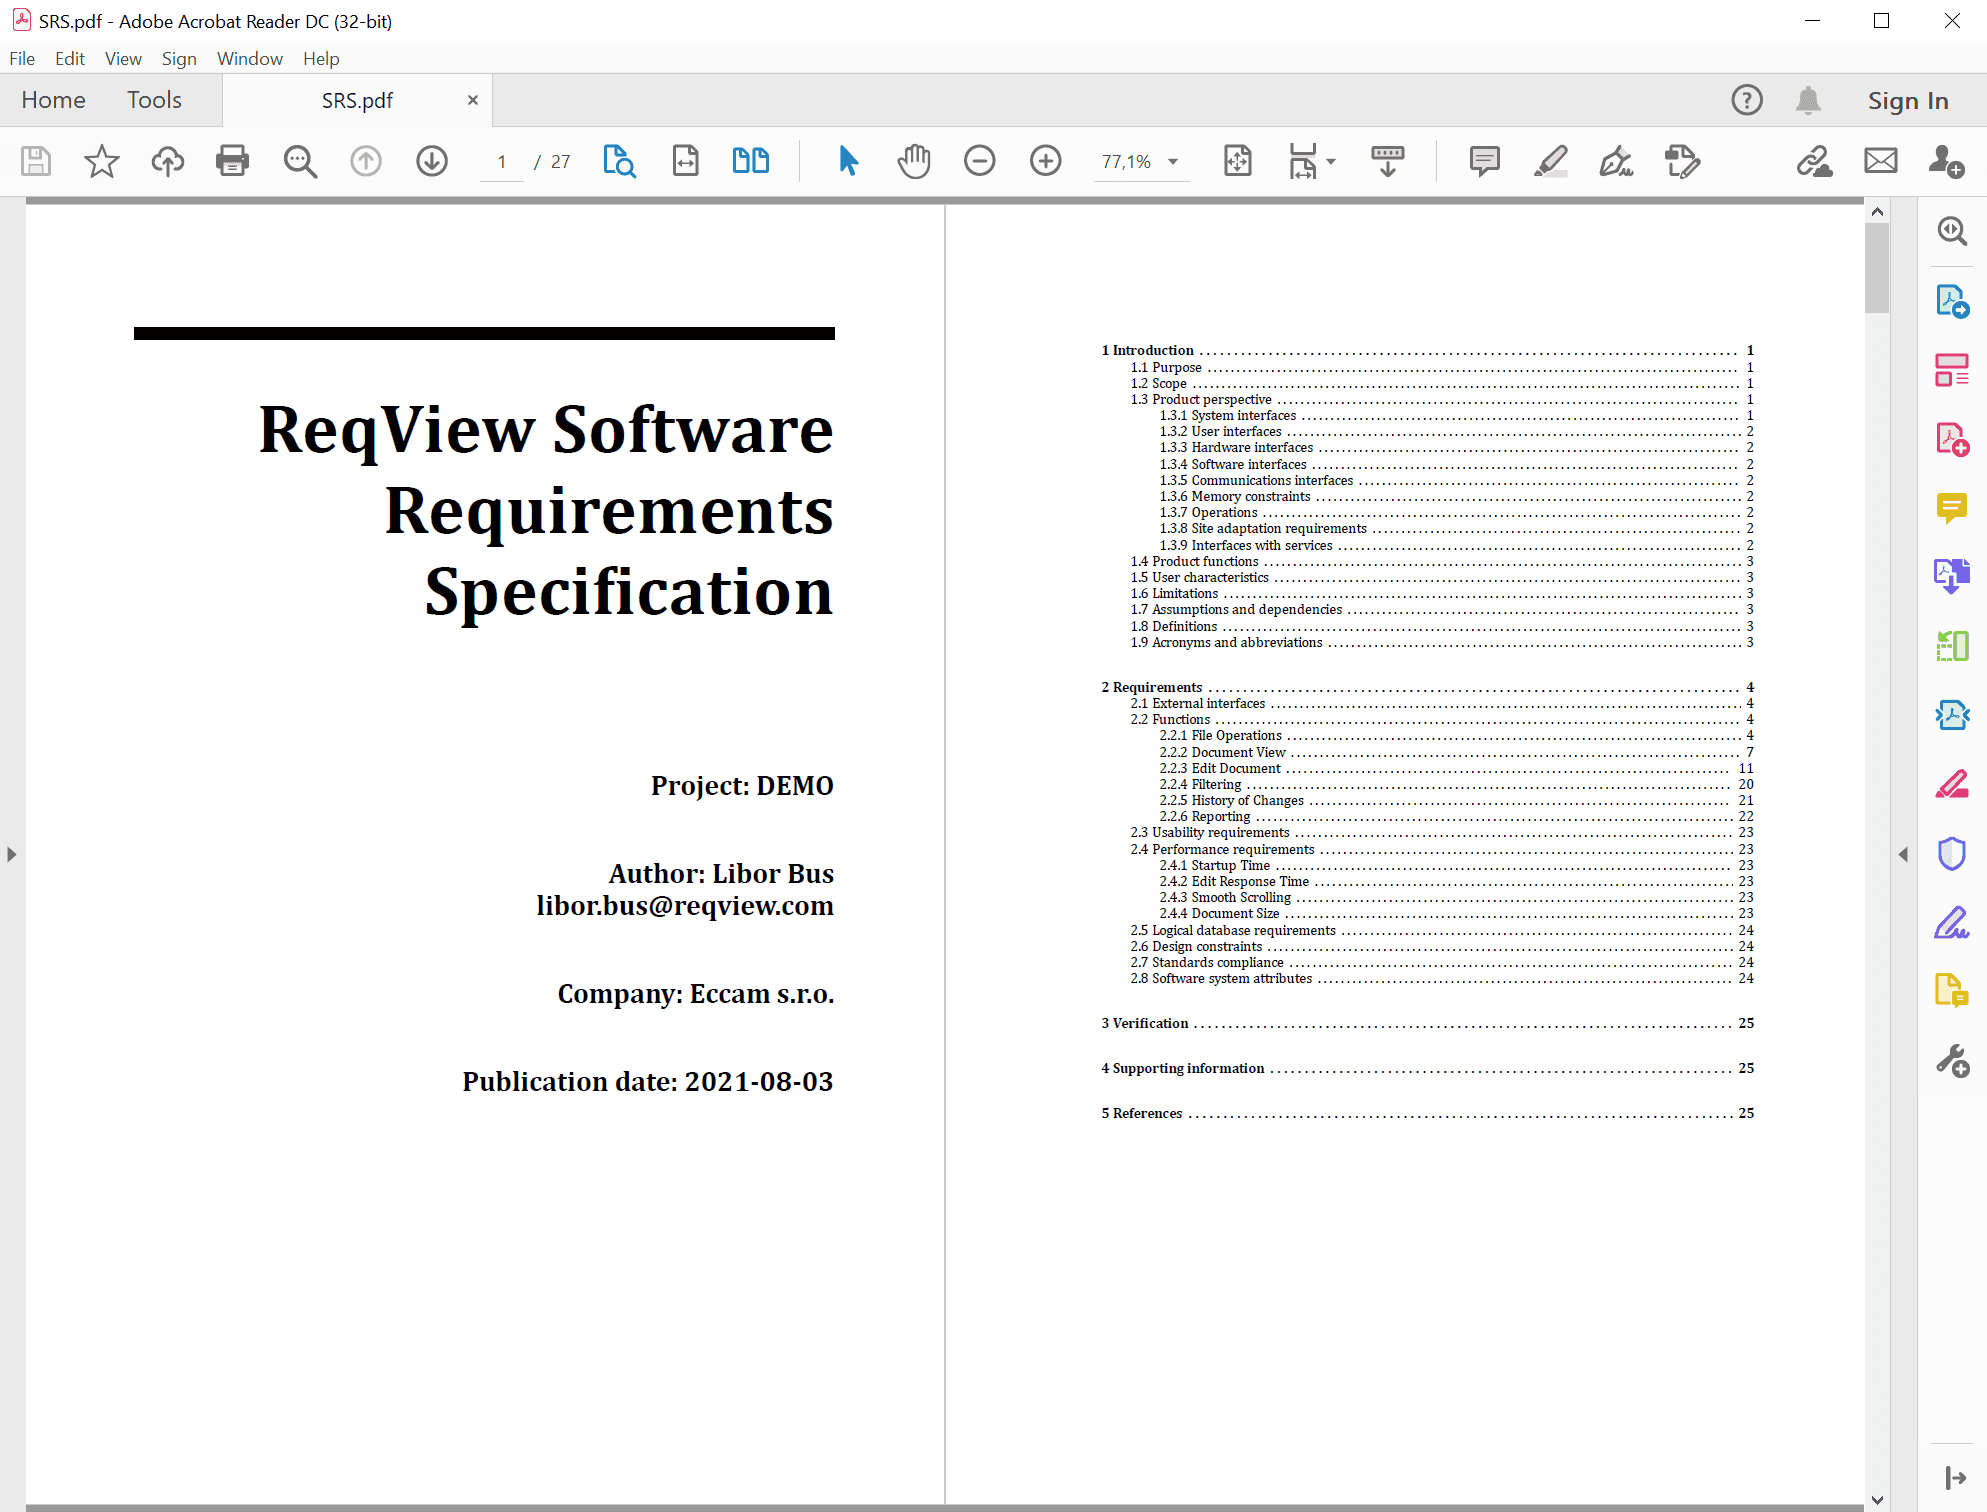 PDF document with requirements and traceability links exported from ReqView